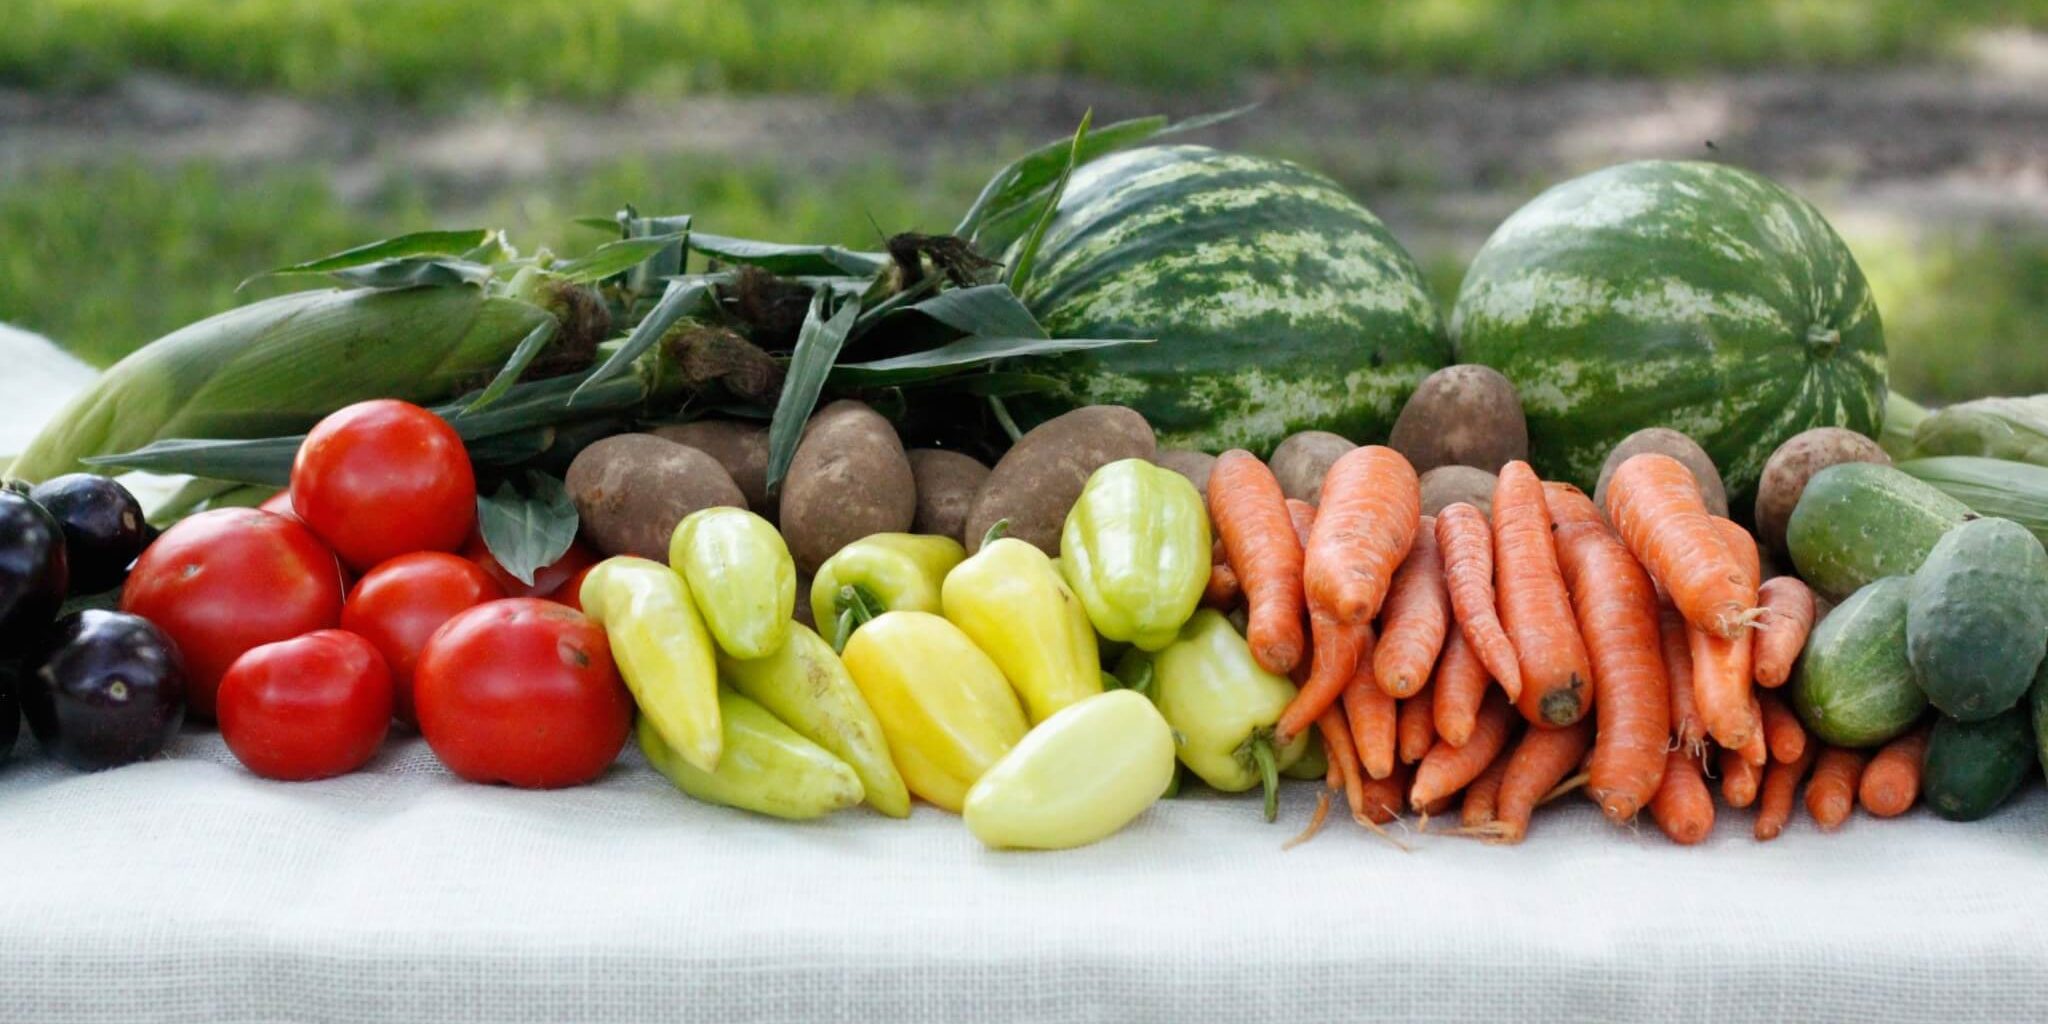 A variety of fresh produce laid out on a table